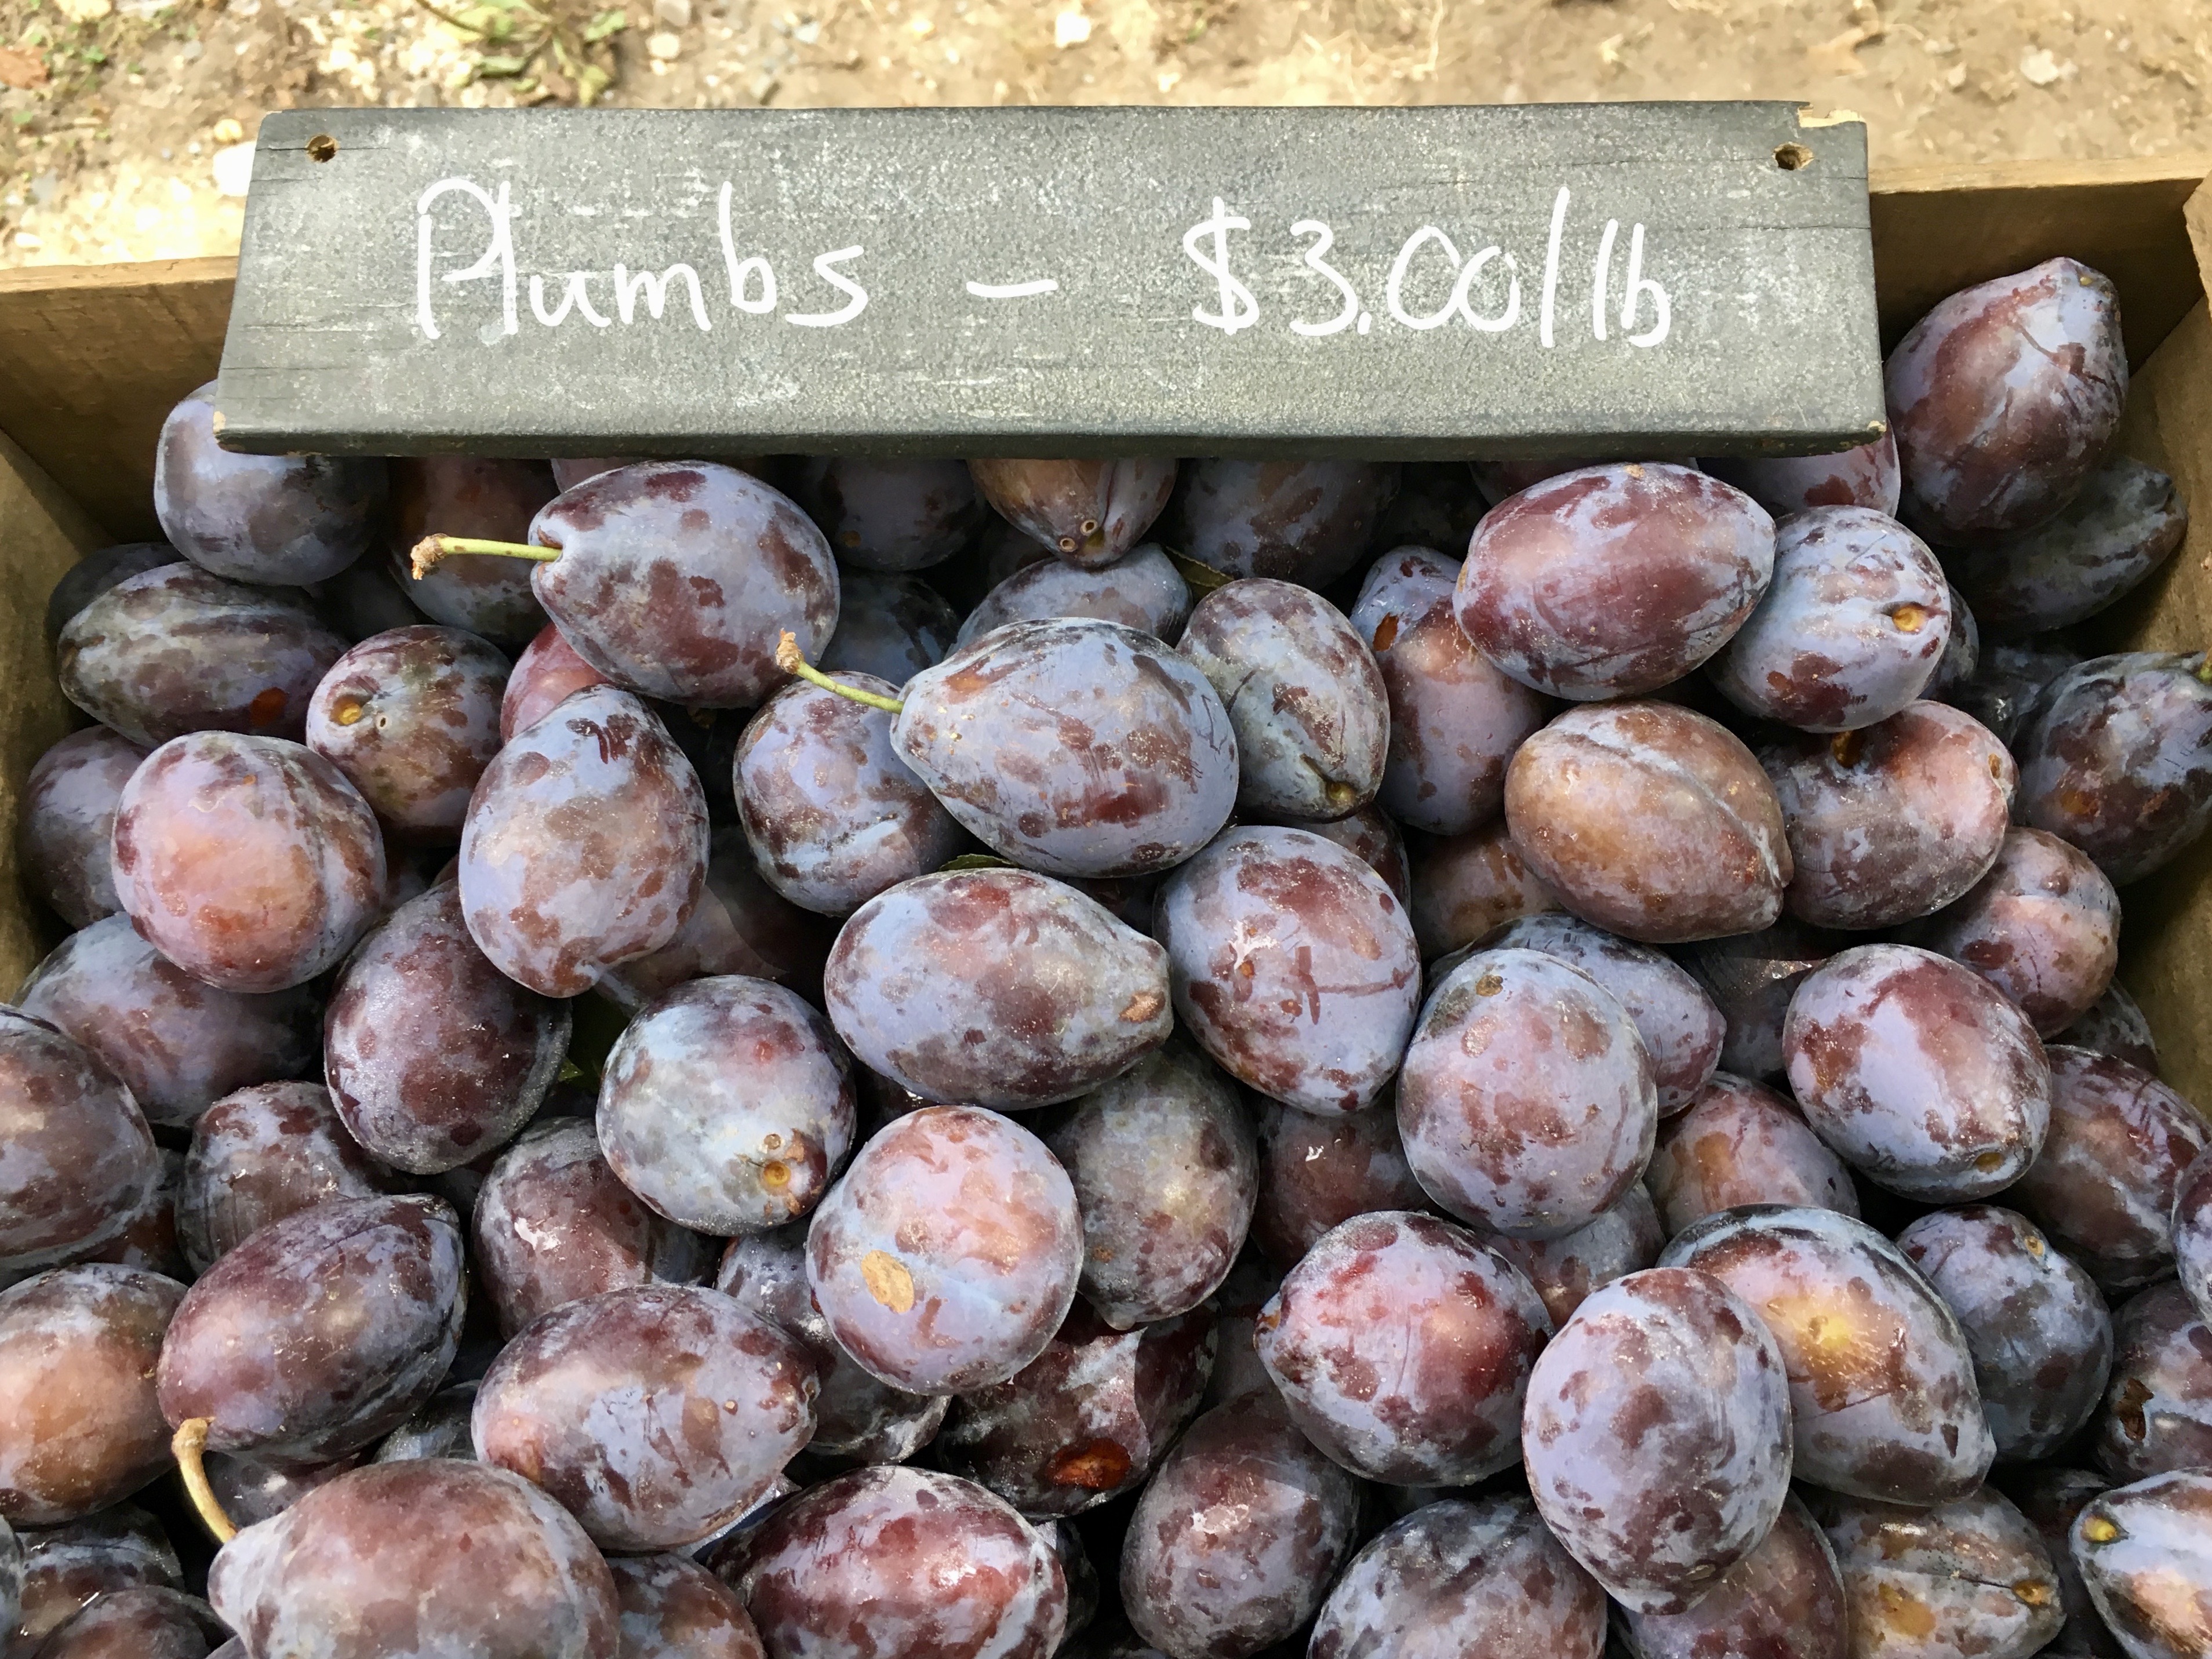 Farmstand sign: reads Plumbs - $3.00/lb